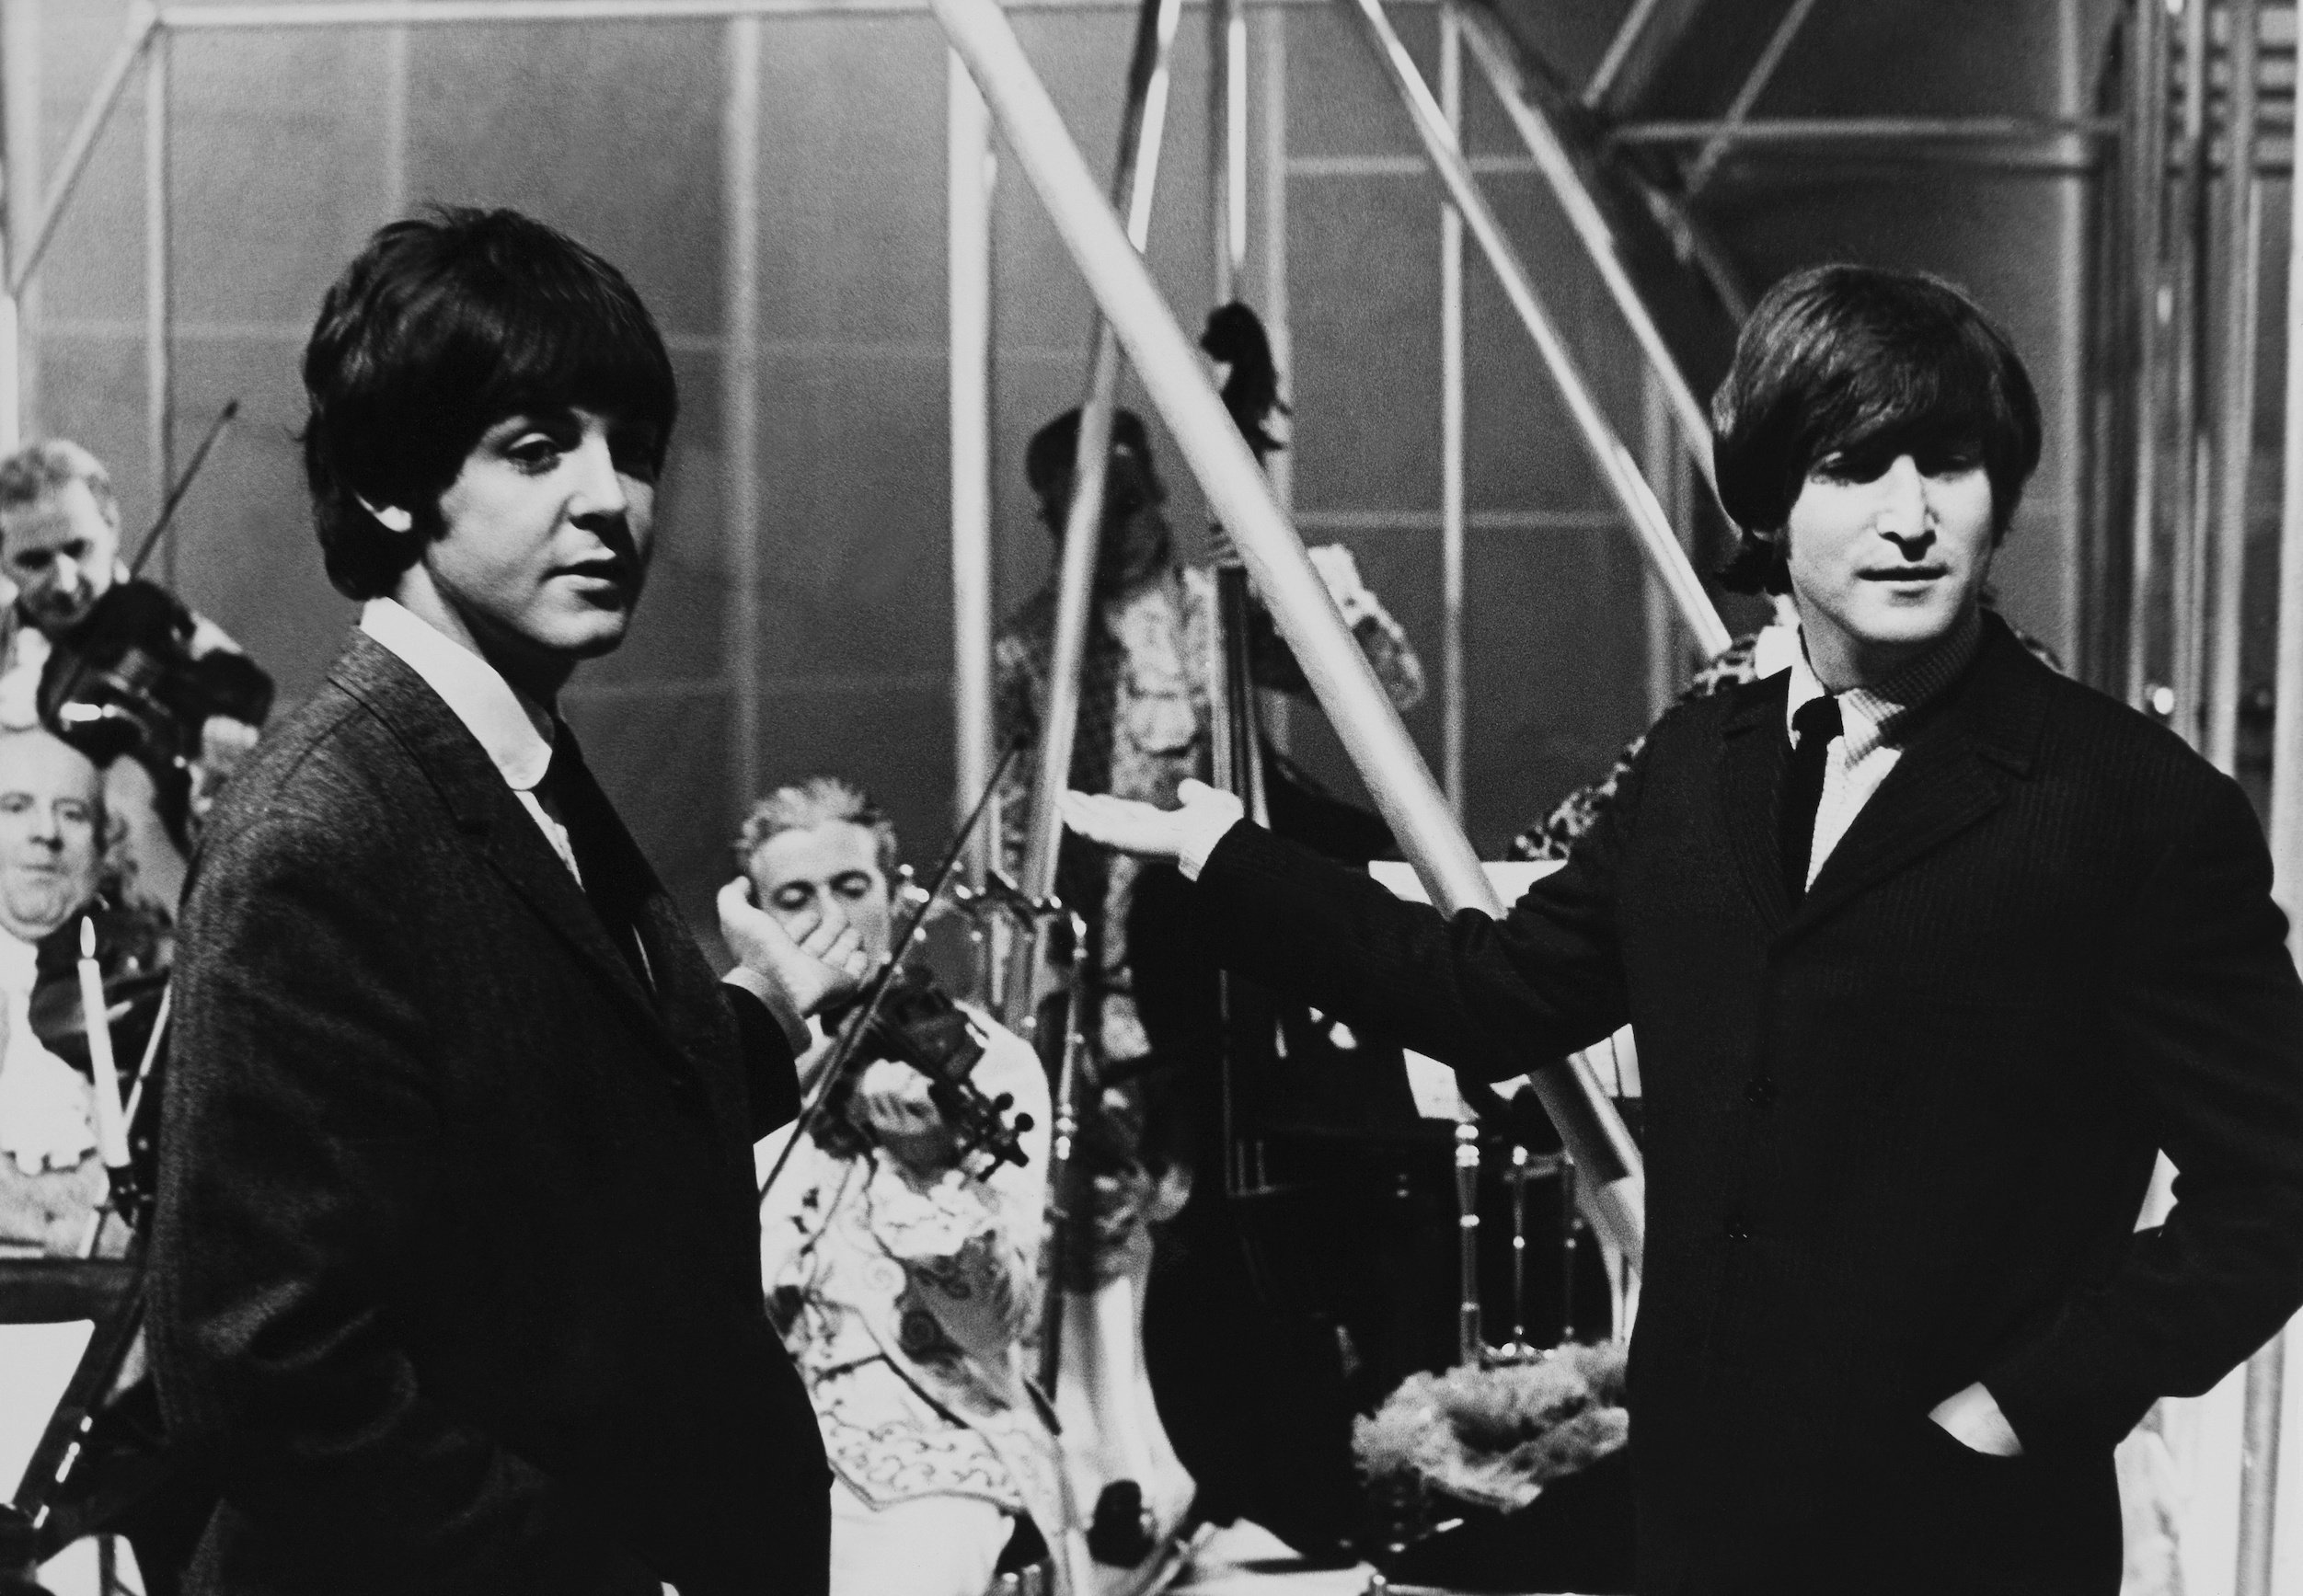 Paul McCartney Said He and John Lennon Would ‘Police Each Other’ Over Plagiarizing Other Songs